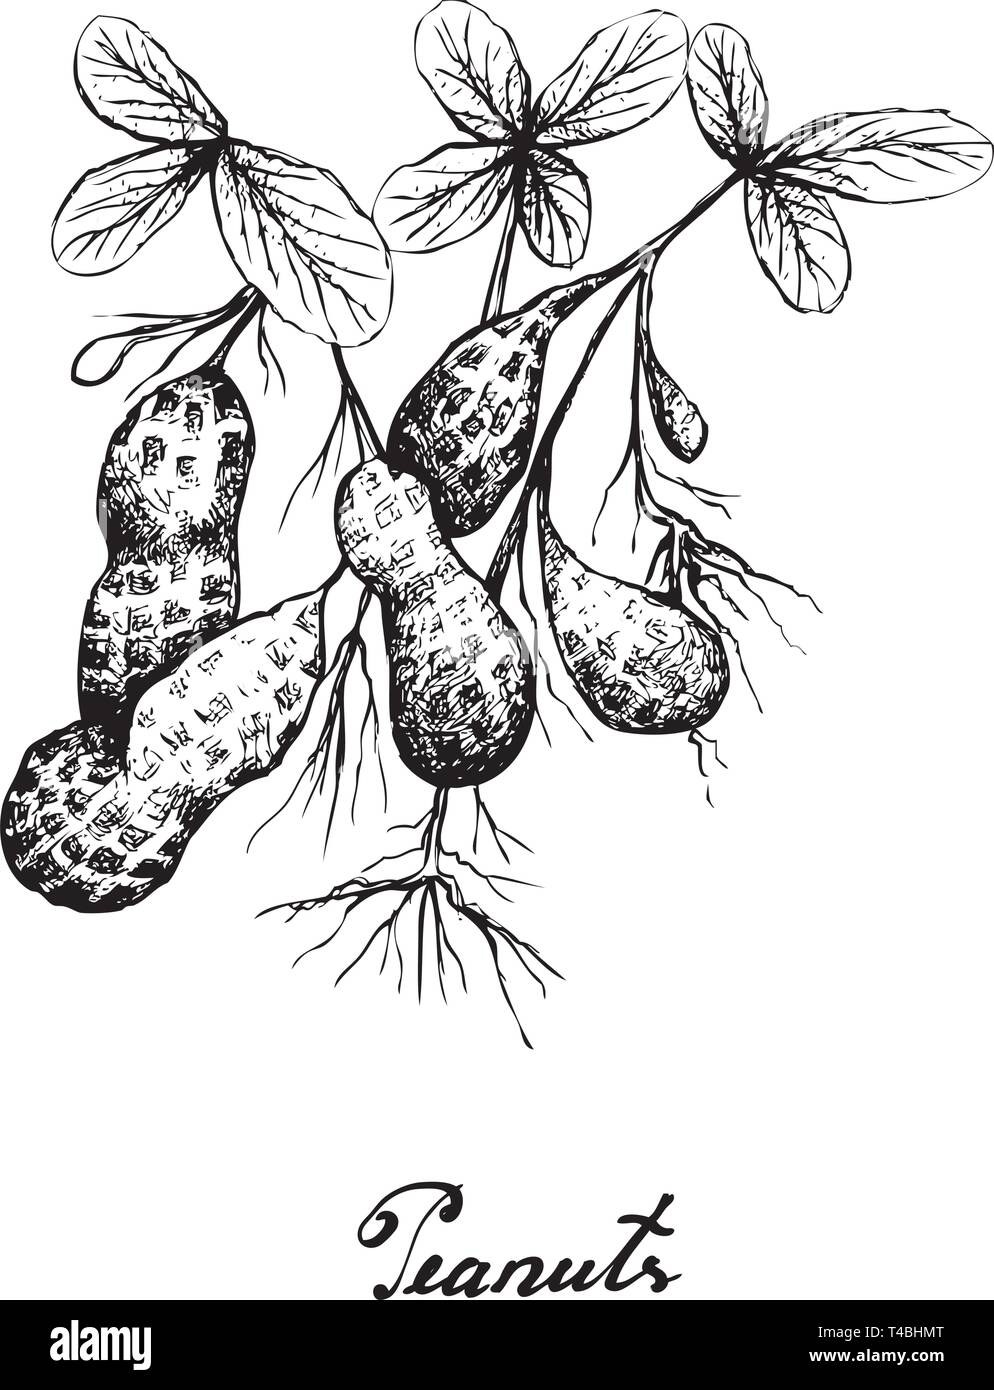 Peanut isolated sketch of fresh groundnut Vector Image